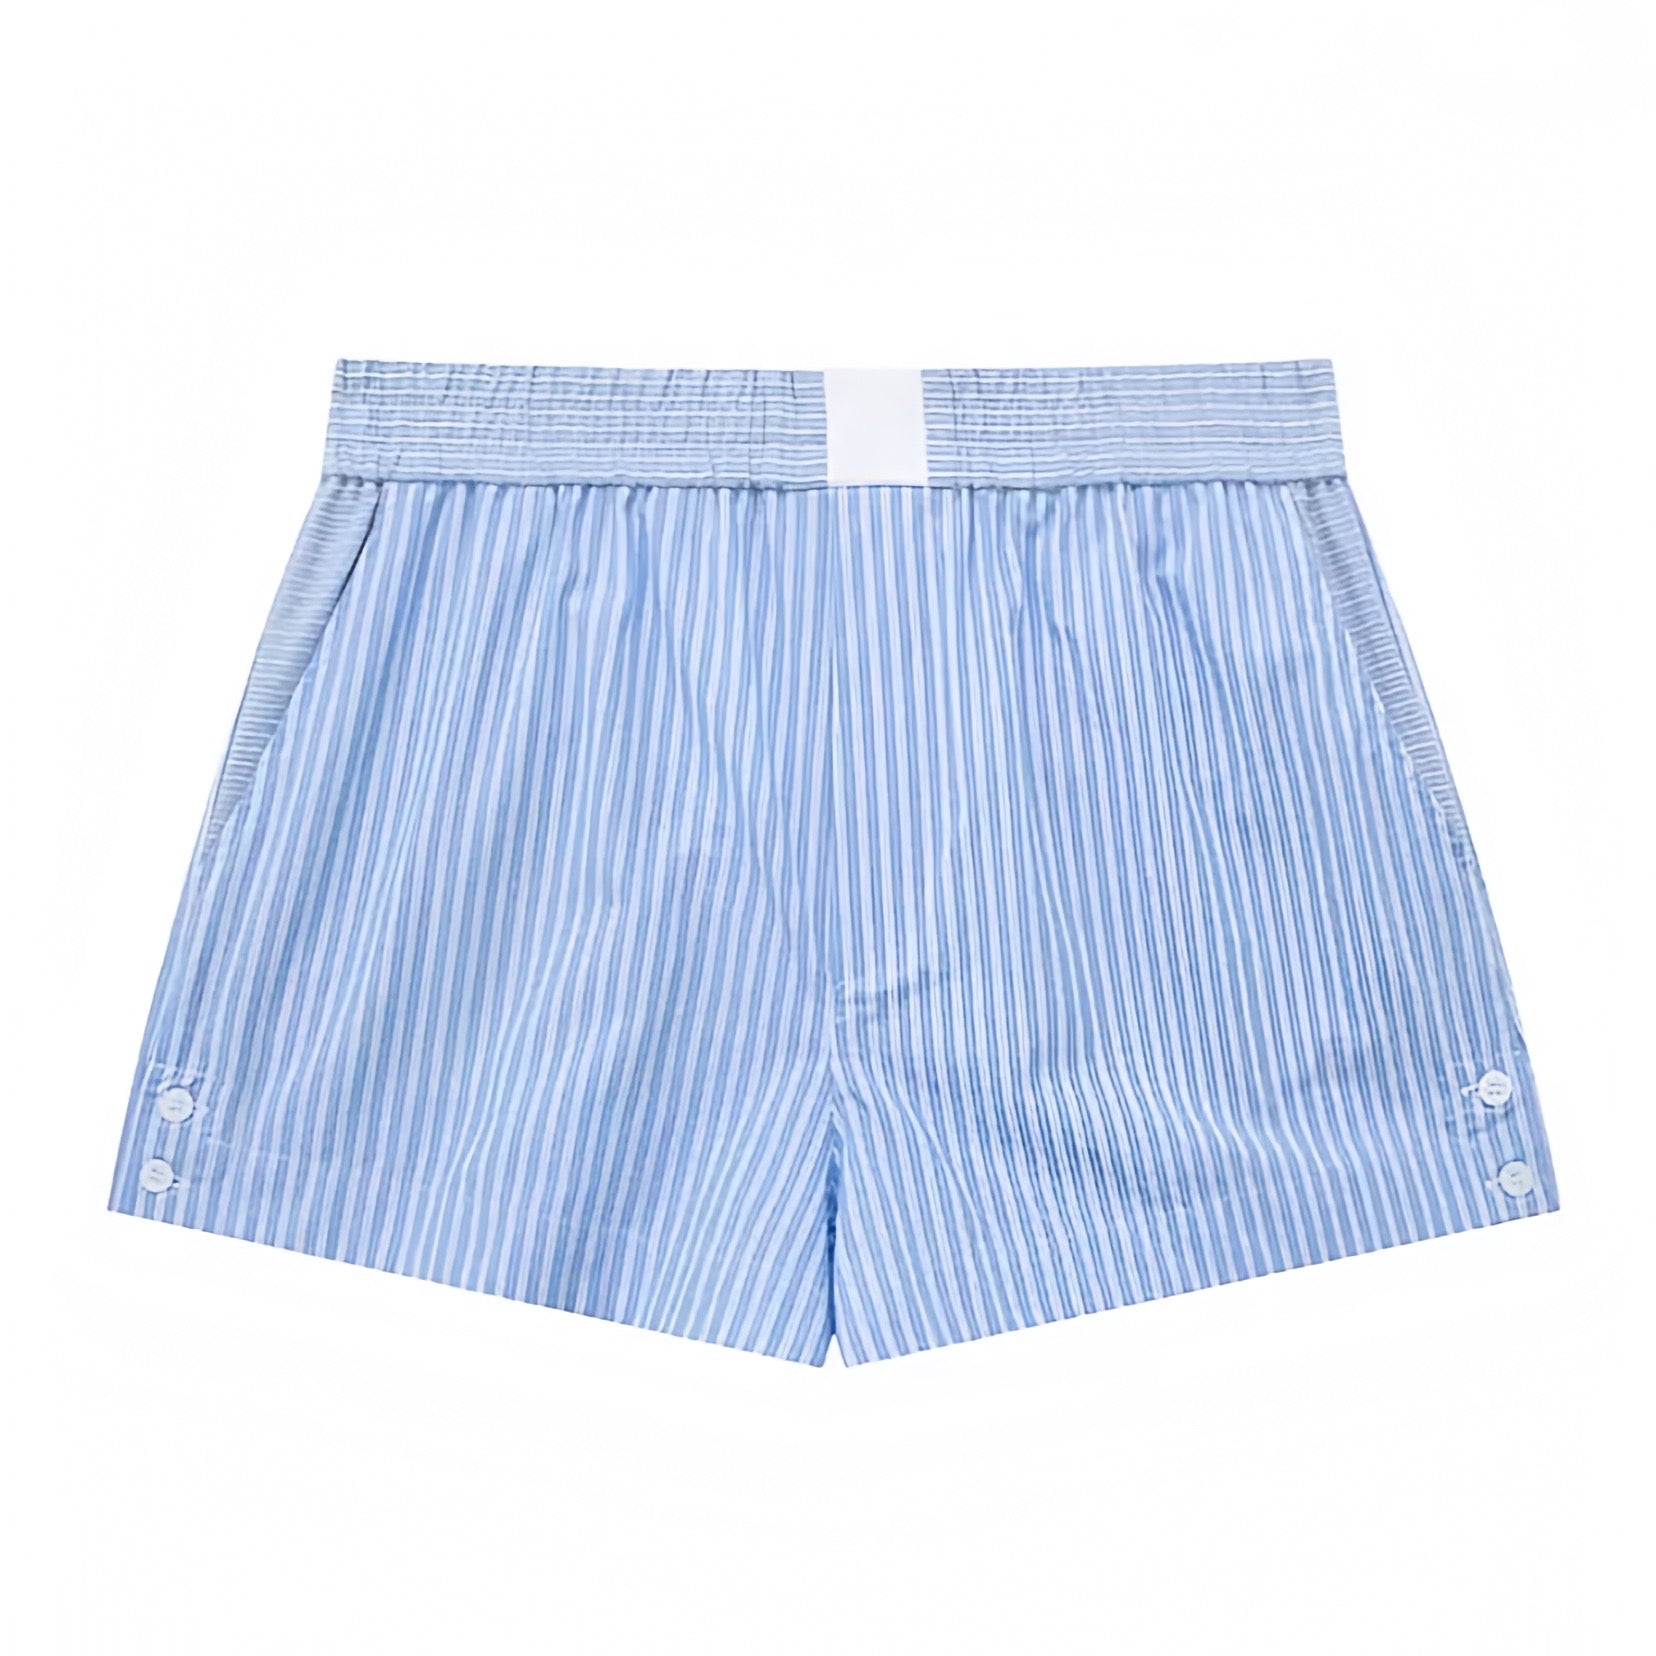 light-blue-and-white-striped-seersucker-pinstriped-patterned-fitted-waist-low-rise-waisted-cotton-linen-short-mini-sweat-shorts-with-pockets-women-ladies-chic-trendy-spring-2024-summer-elegant-casual-feminine-preppy-style-coastal-granddaughter-european-vacation-beach-wear-zara-brandy-melville-pacsun-urban-outfitters-edikted